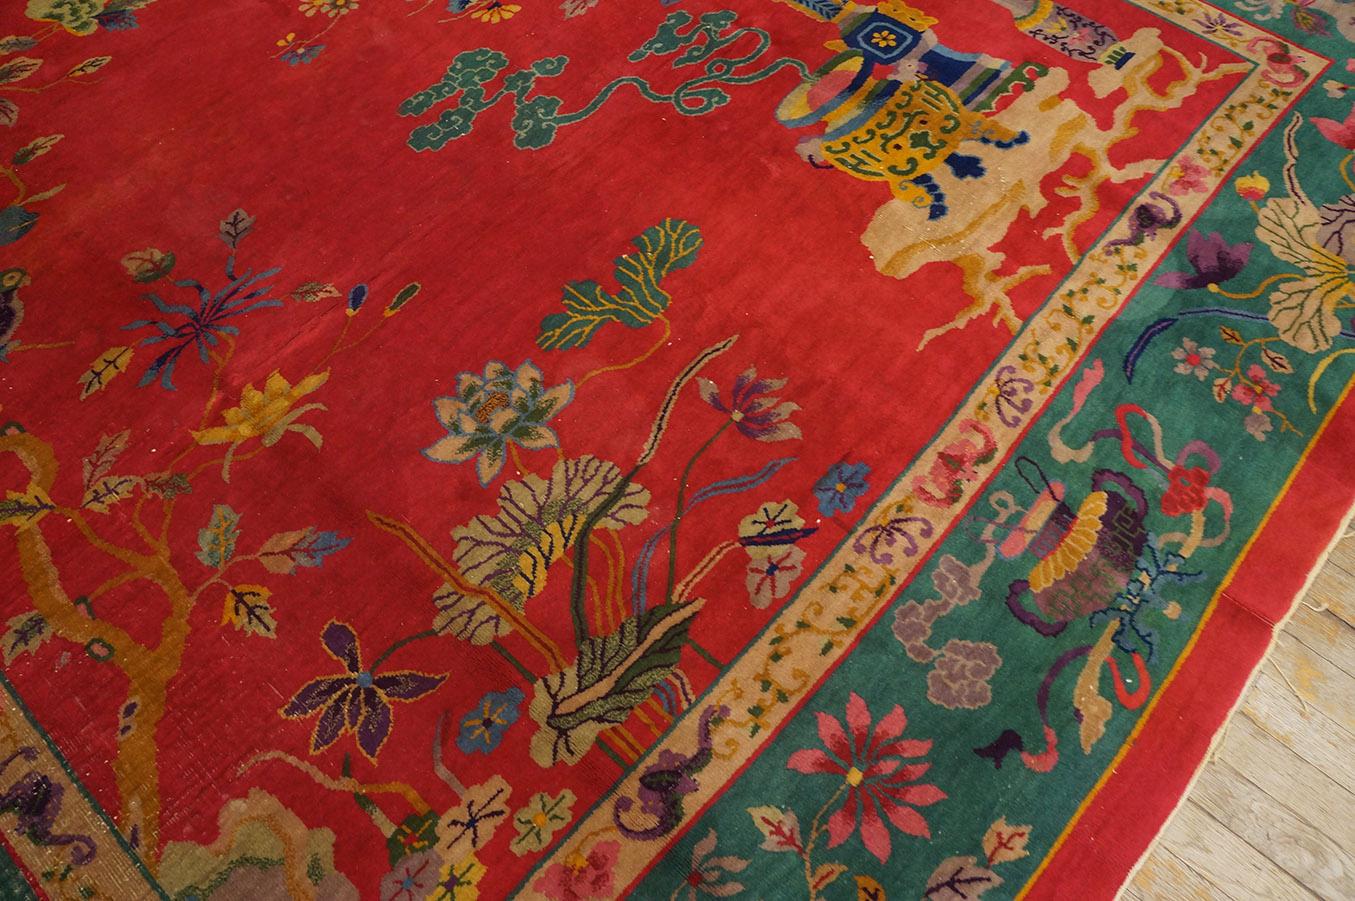 1920s Chinese Art Deco Carpet ( 9' x 11' 8'' - 275 x 355 cm ) In Good Condition For Sale In New York, NY